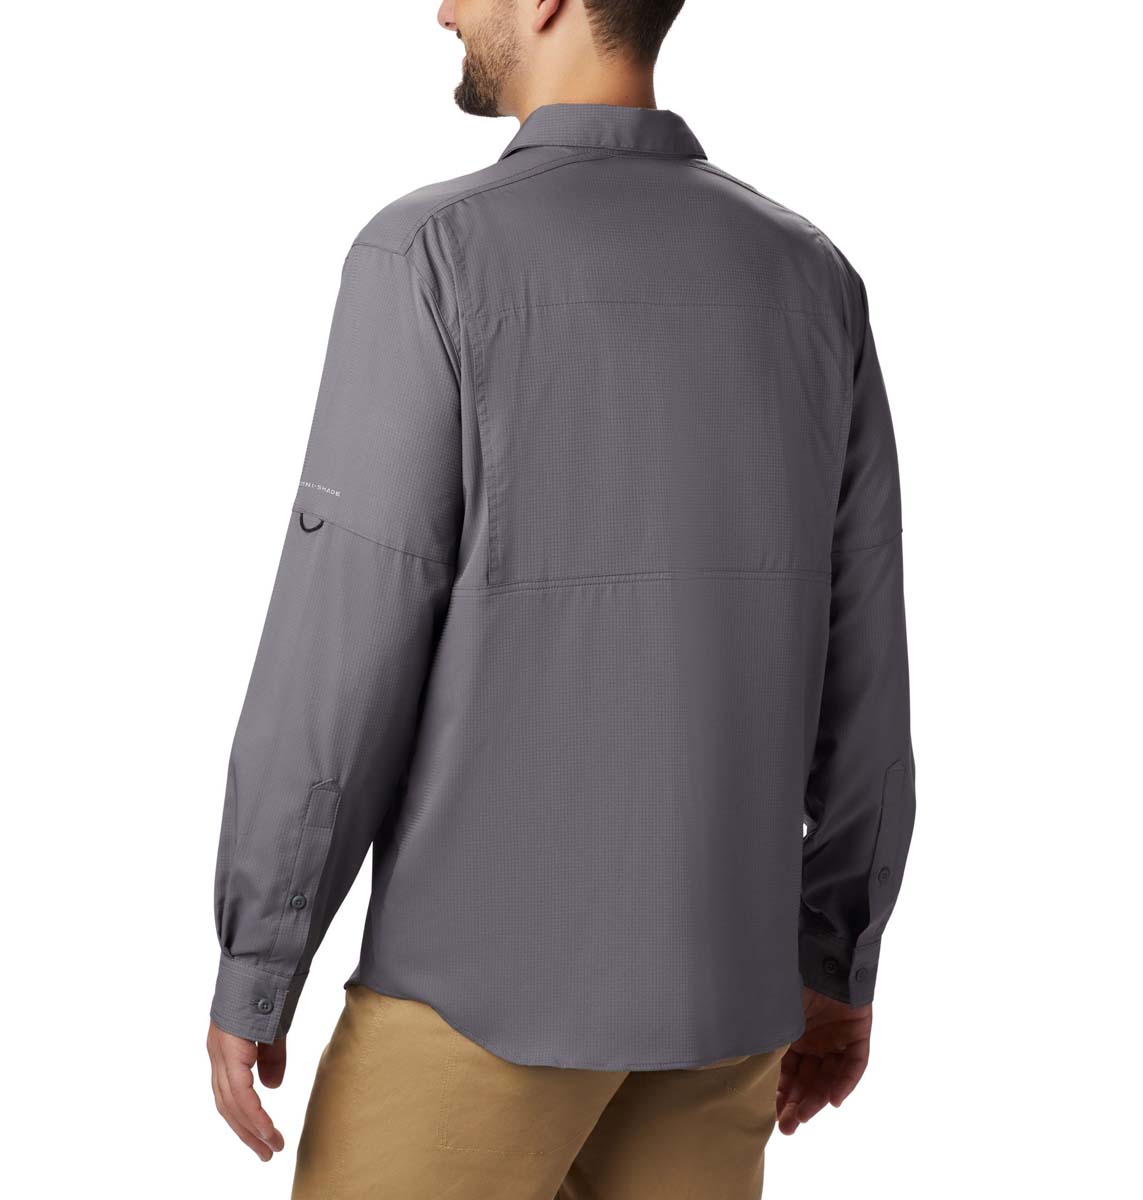 https://borregooutfitters.com/wp-content/uploads/Columbia-Sportswear-Silver-Ridge-Lite-Mens-Back-City-Grey_1654321_023-Borrego-Outfitters-scaled.jpg